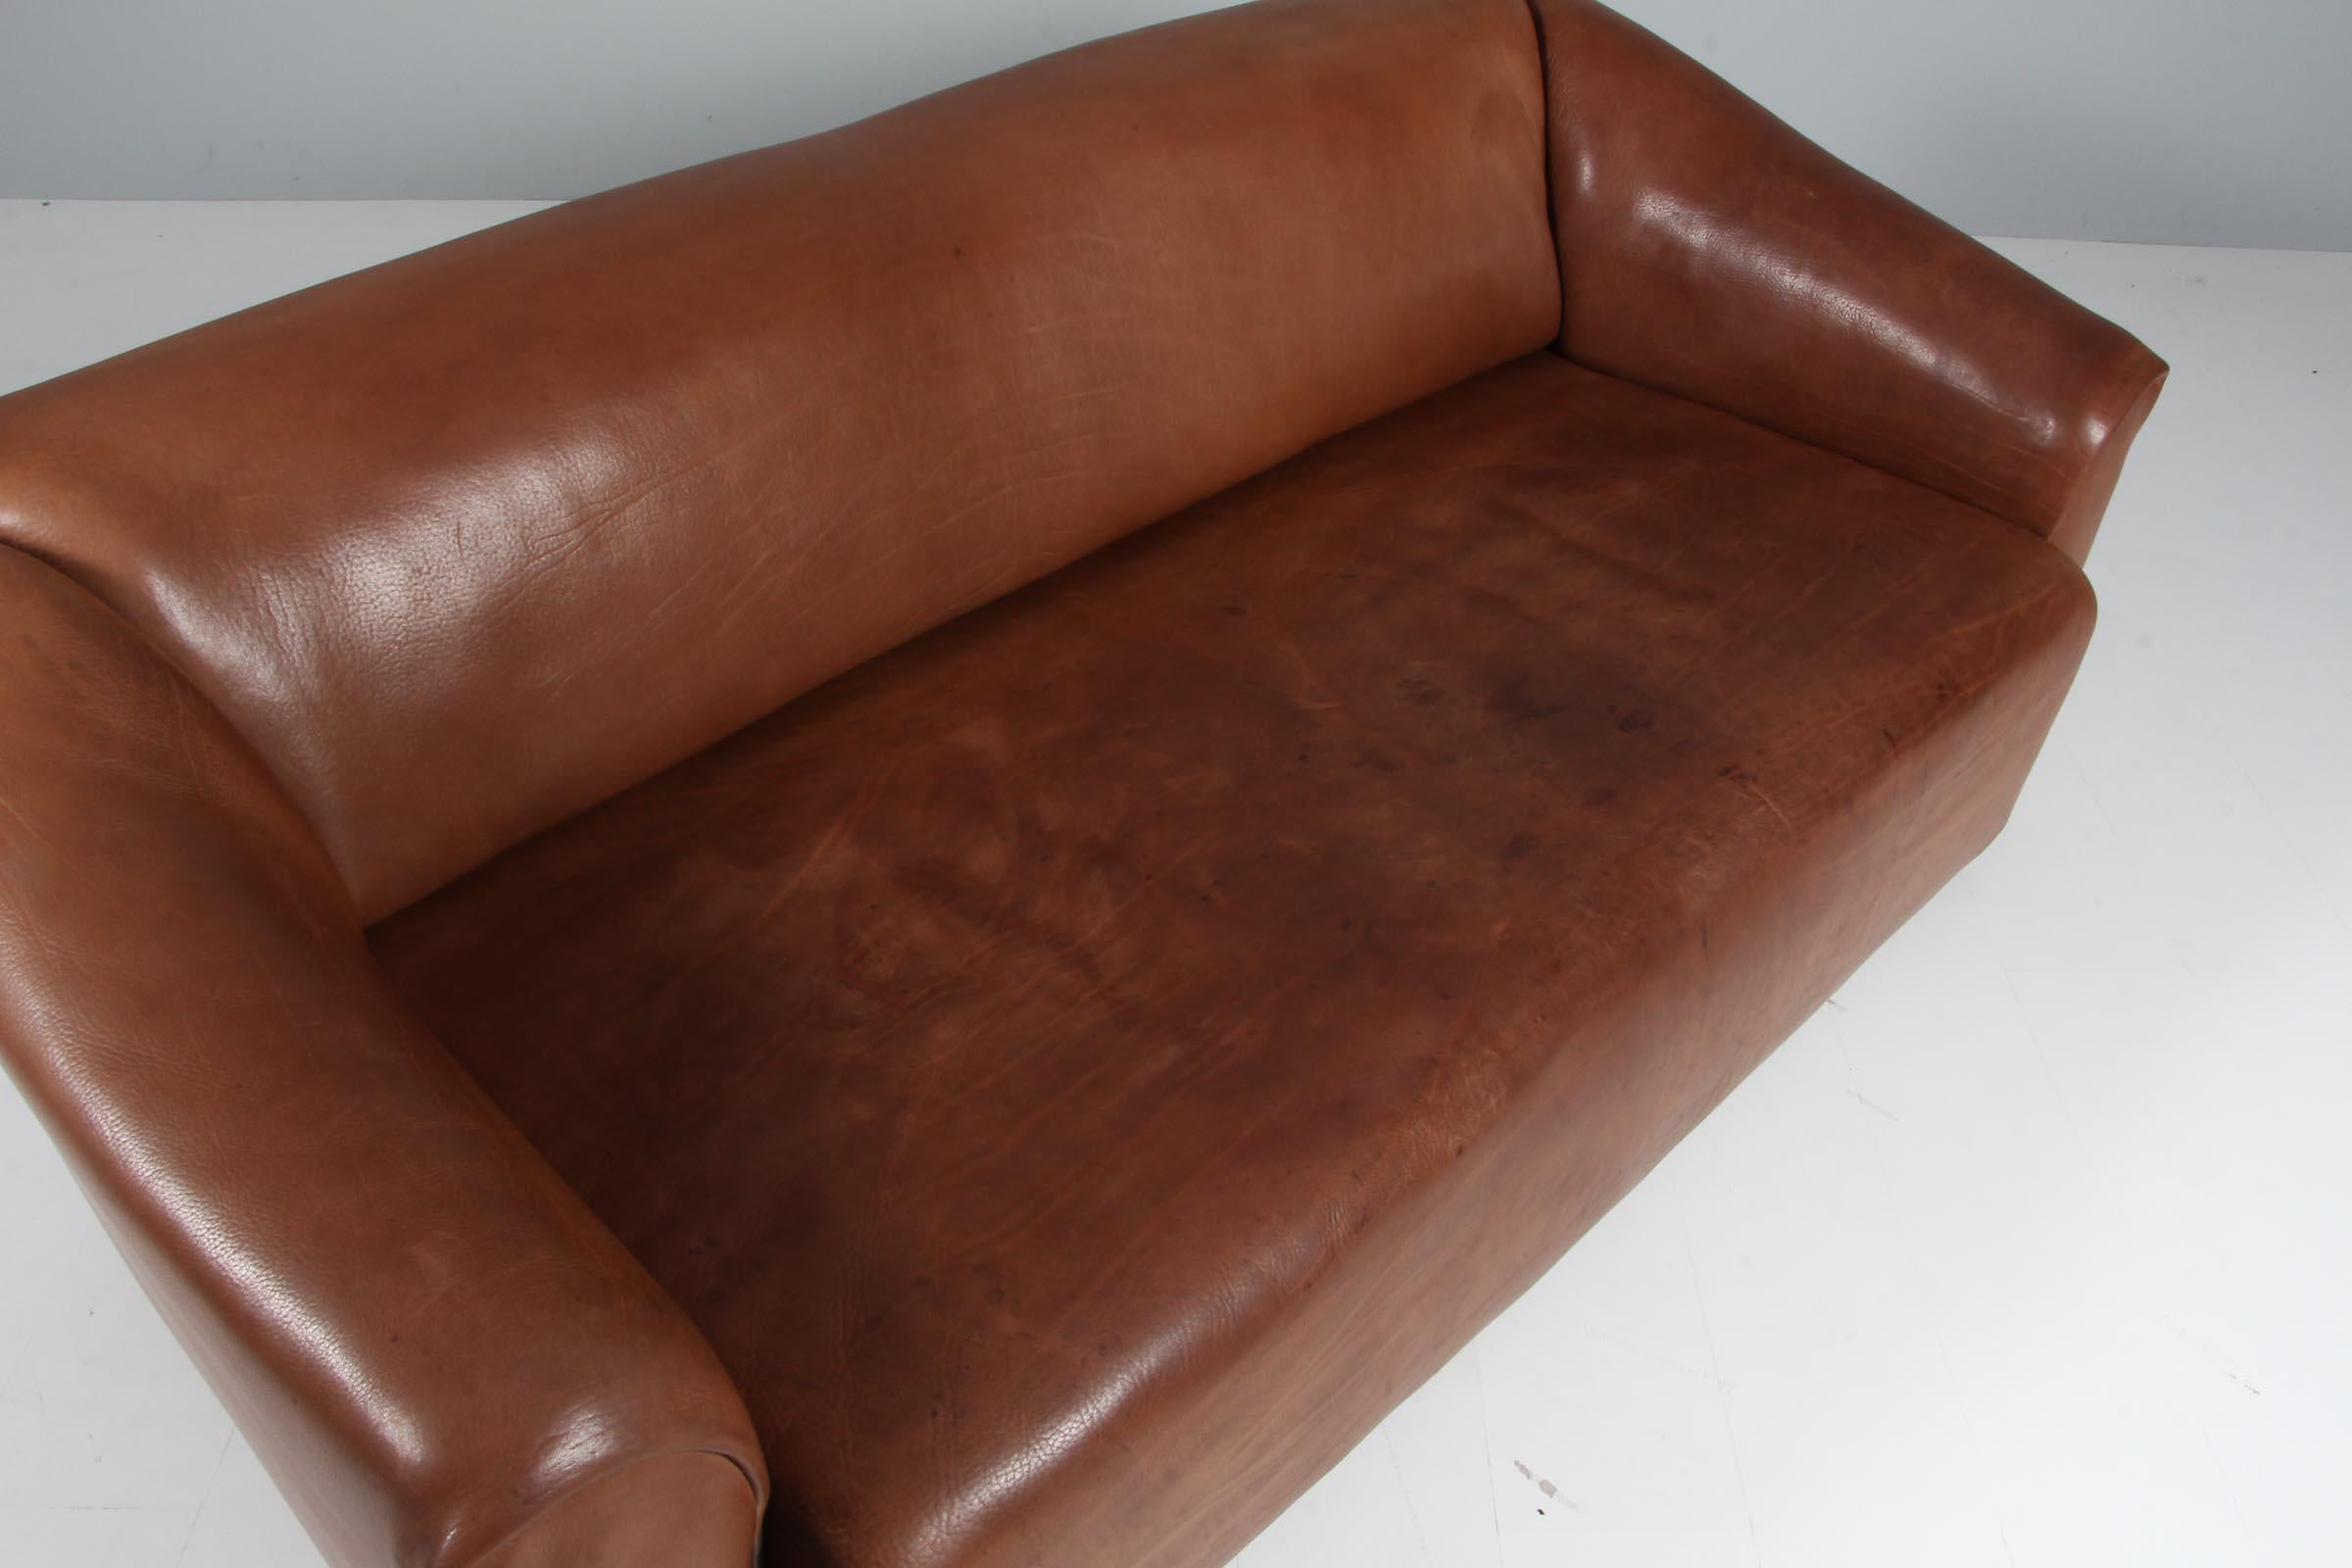 Vintage De Sede Three-Seat Sofa, DS47, Patinated Leather 1